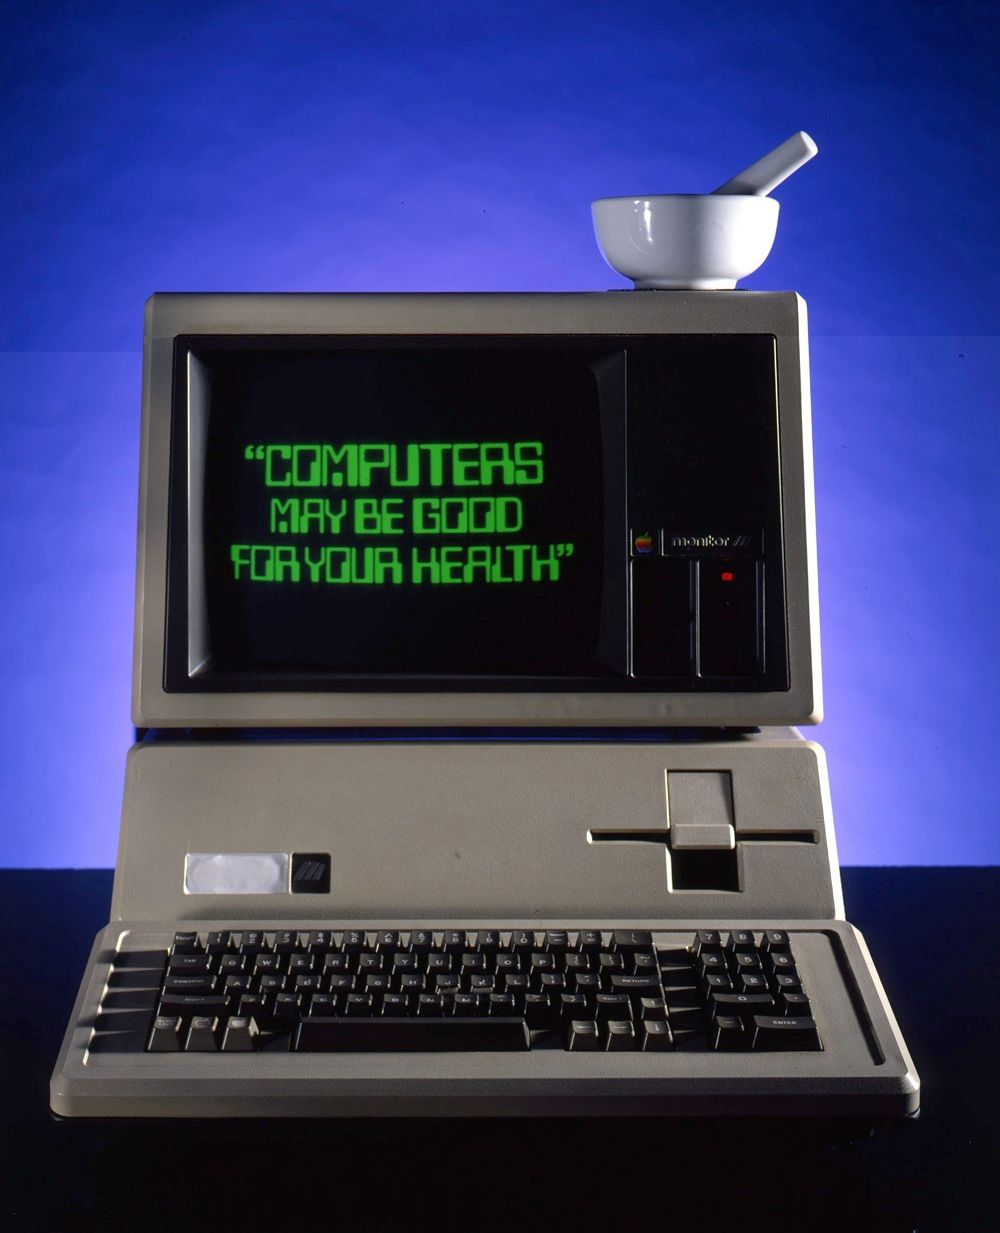 This legendary Apple computer might cost up to $500,000